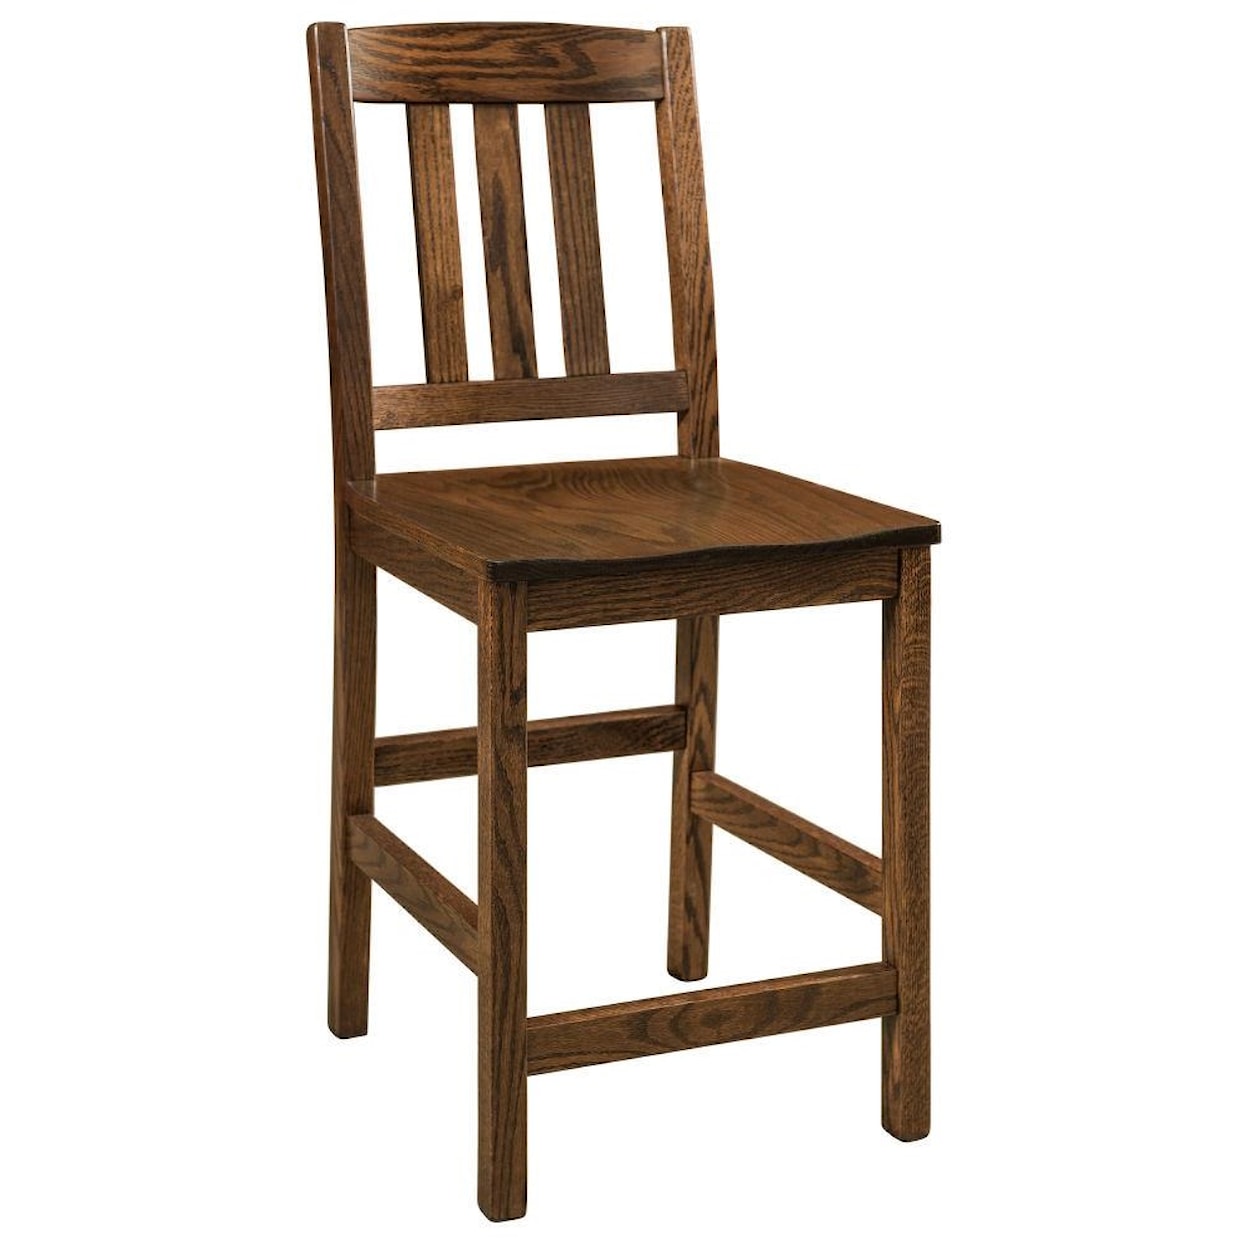 F&N Woodworking Lodge 30" Stationary Stool